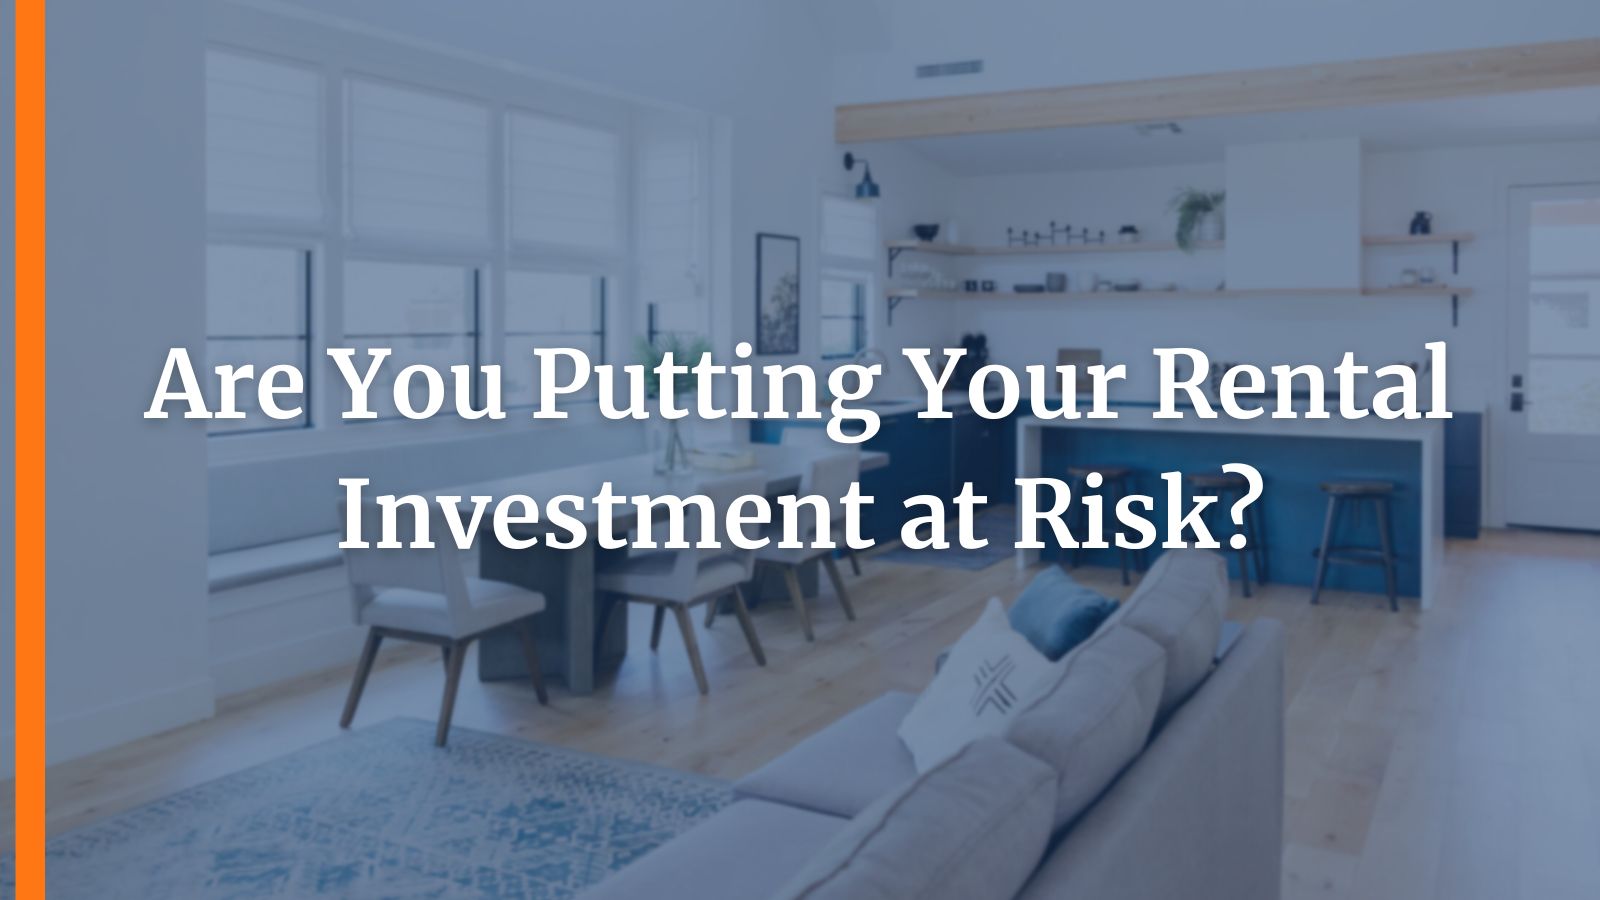 Are You Putting Your Rental Investment at Risk?